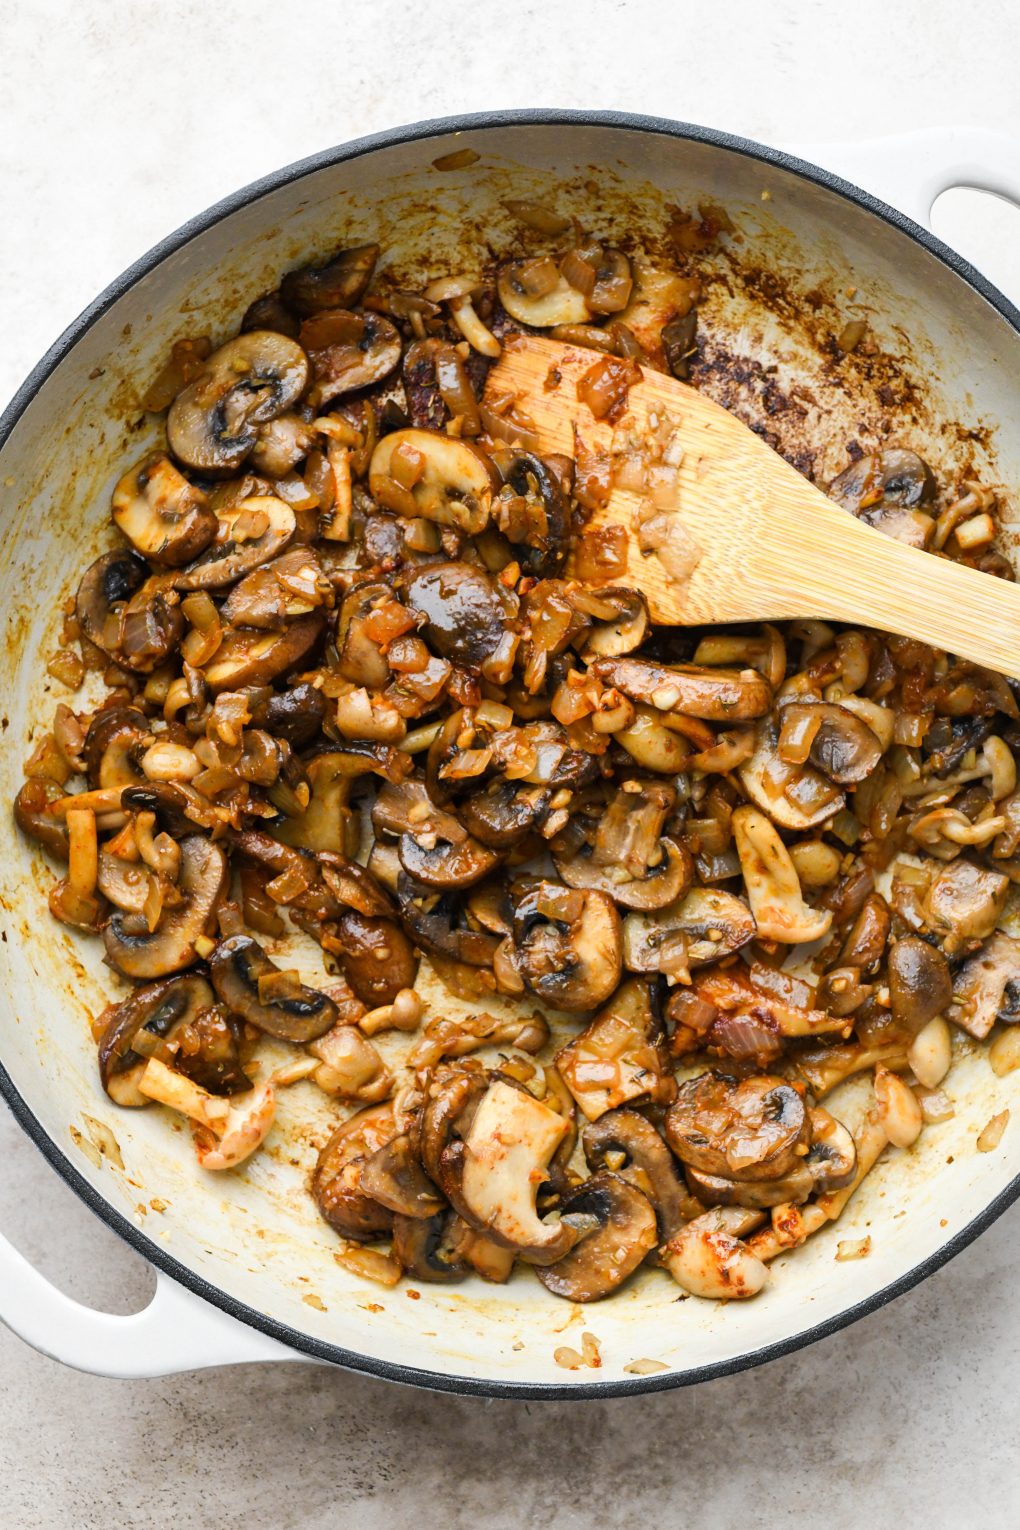 How to make creamy vegan mushroom stroganoff: Cooked mushrooms, onions, and garlic, mixed with spices.